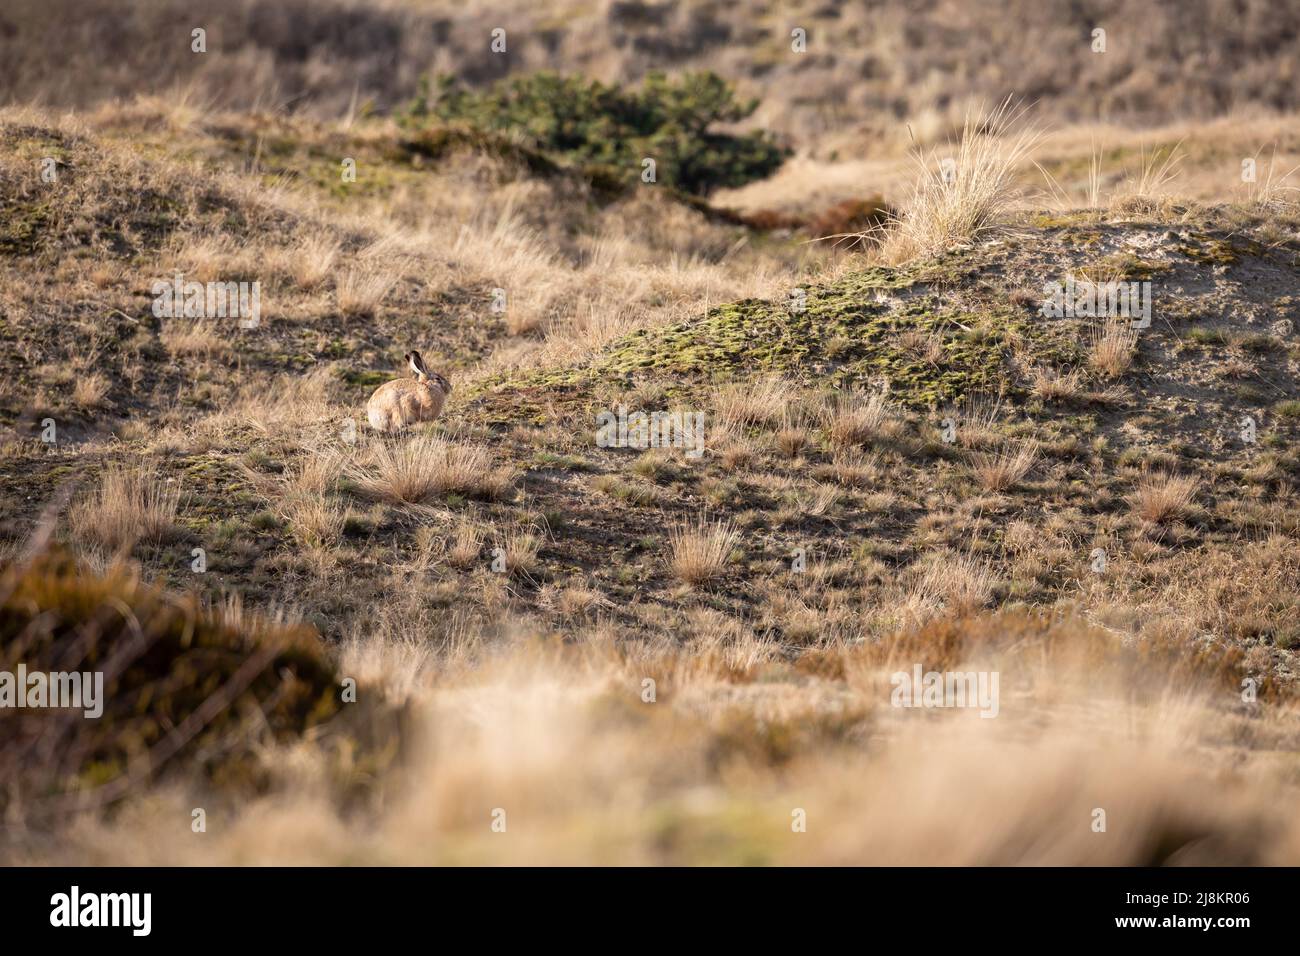 European hare feeding on a dune in spring. Island of Spiekeroog, Germany Stock Photo